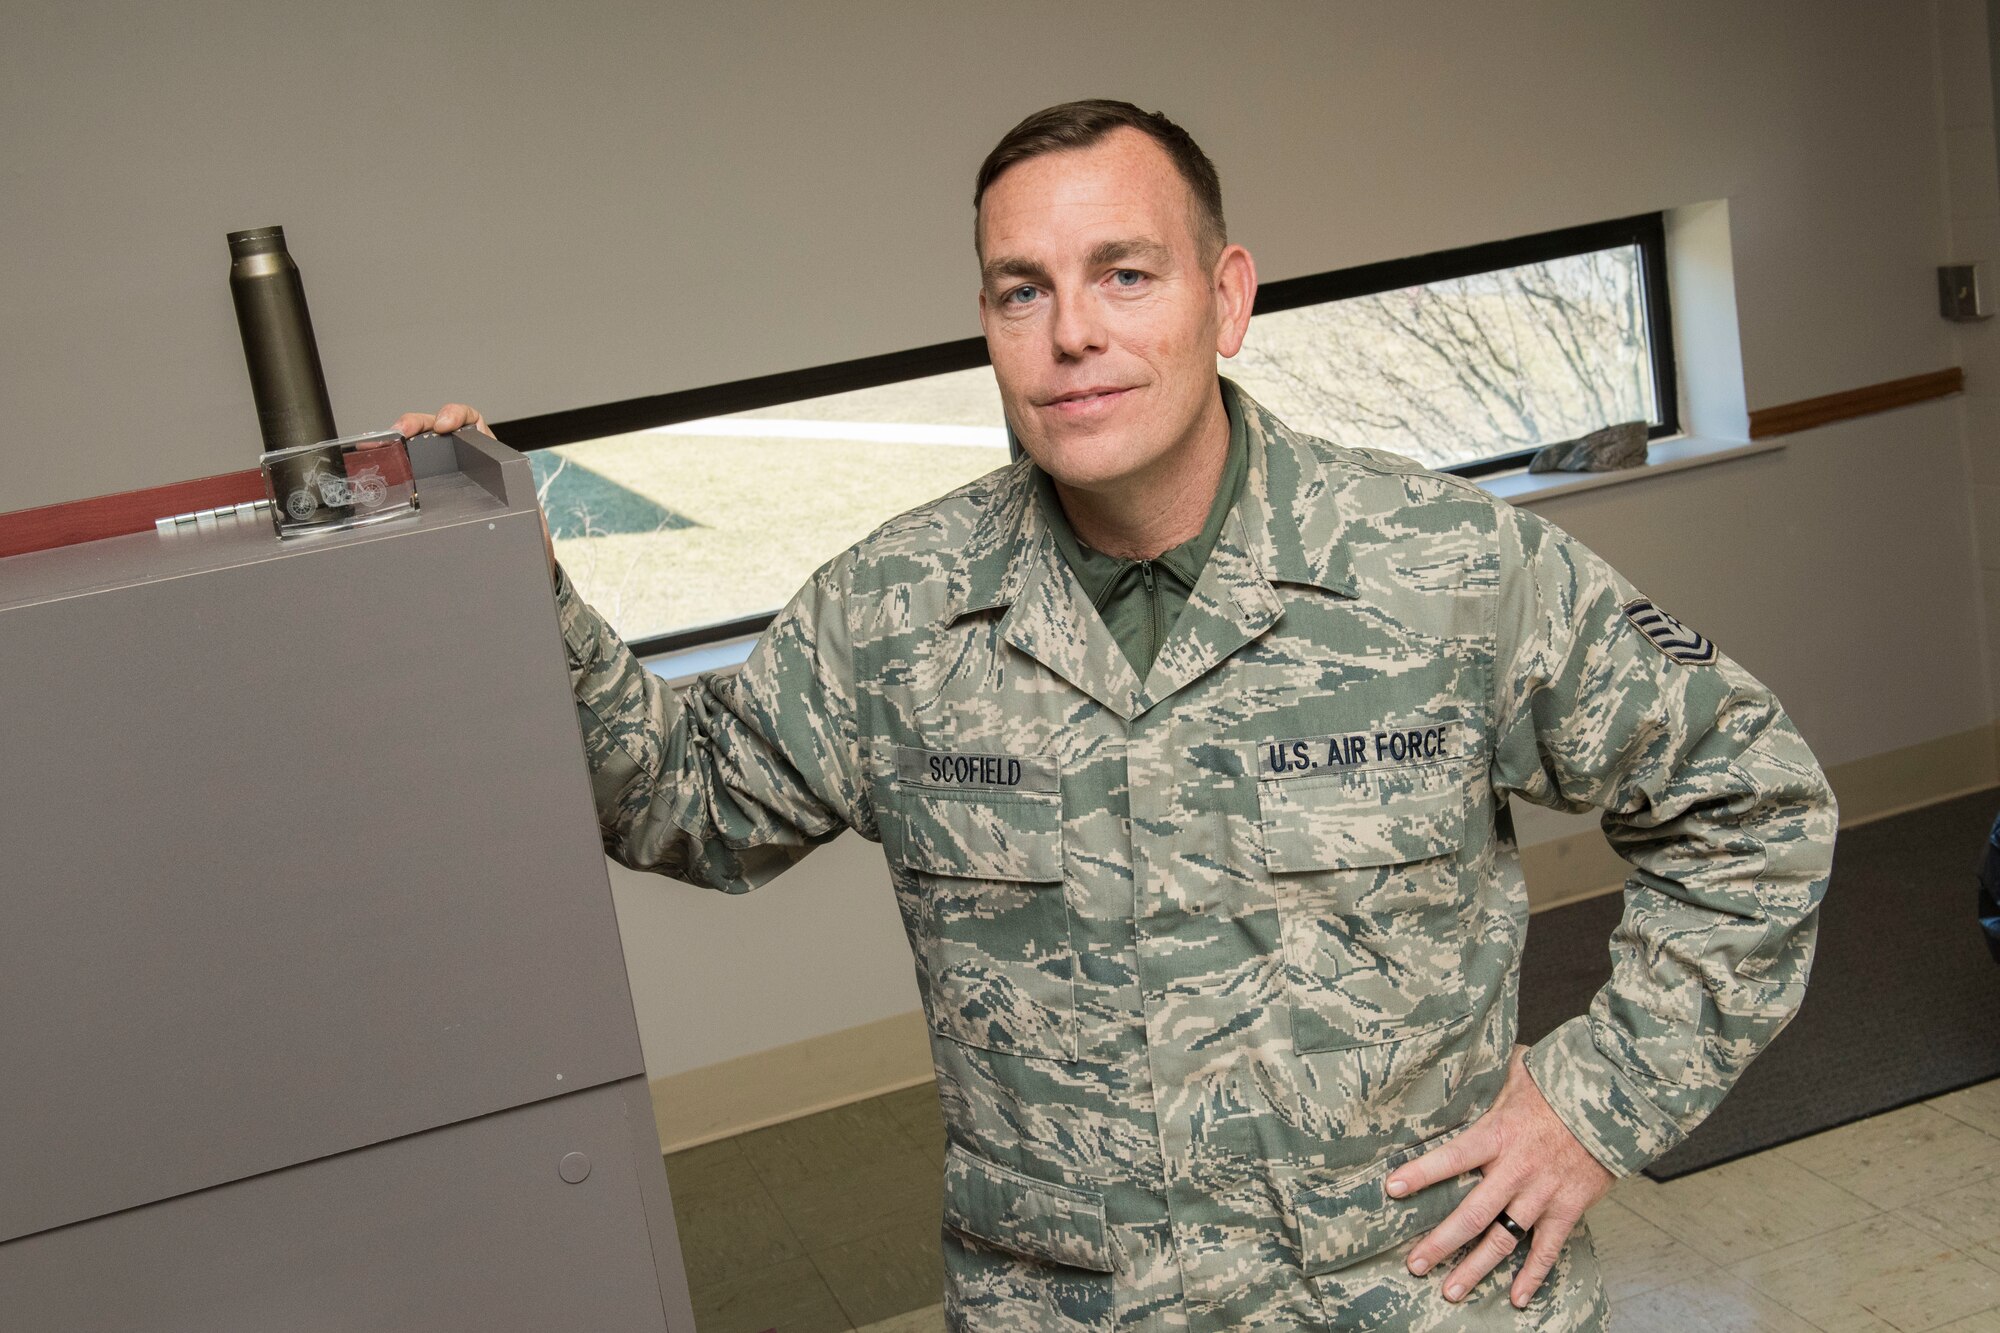 Tech. Sgt. Robert "Jim" Scofield, a budget analyst for the 167th Comptroller Flight, made significant changes to his diet after attending a lunch and learn event hosted by the 167th Medical Group which he credits to improving his overall health and saving his military career.